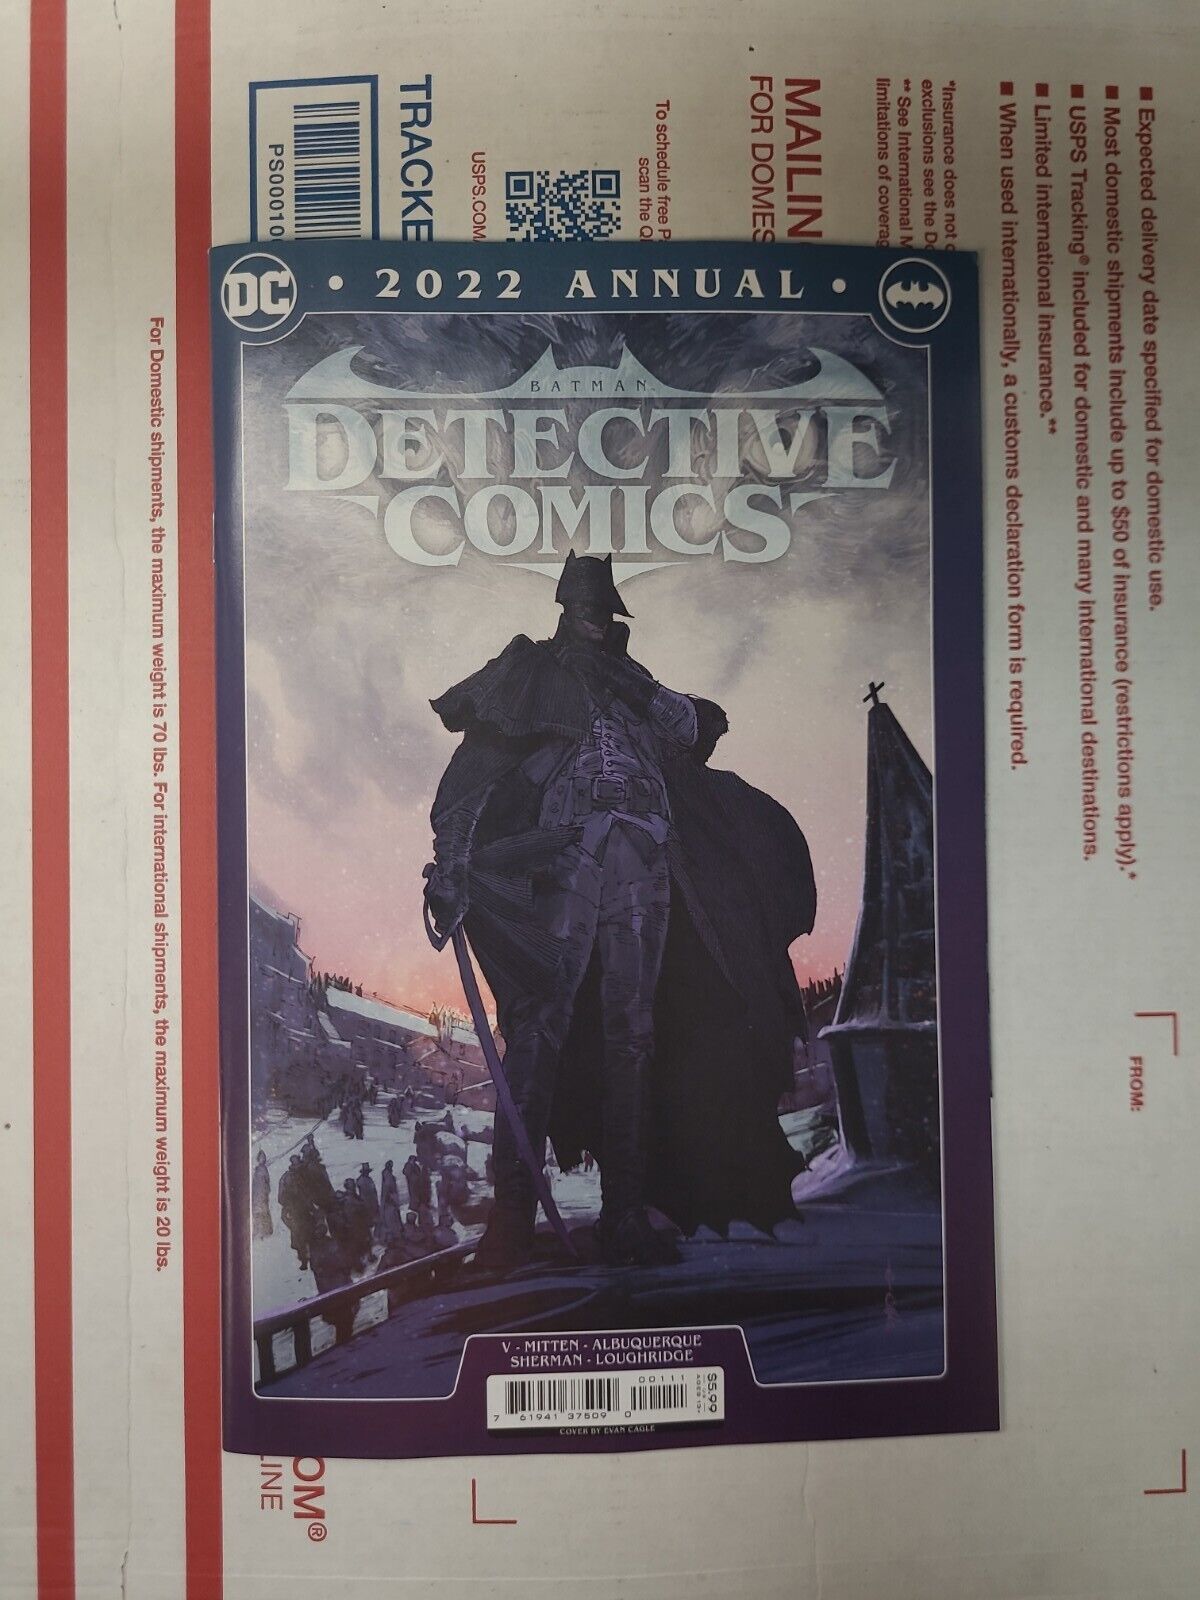 DETECTIVE COMICS 2022 ANNUAL #1 - EVAN EAGLE MAIN COVER NM- OR BETTER 